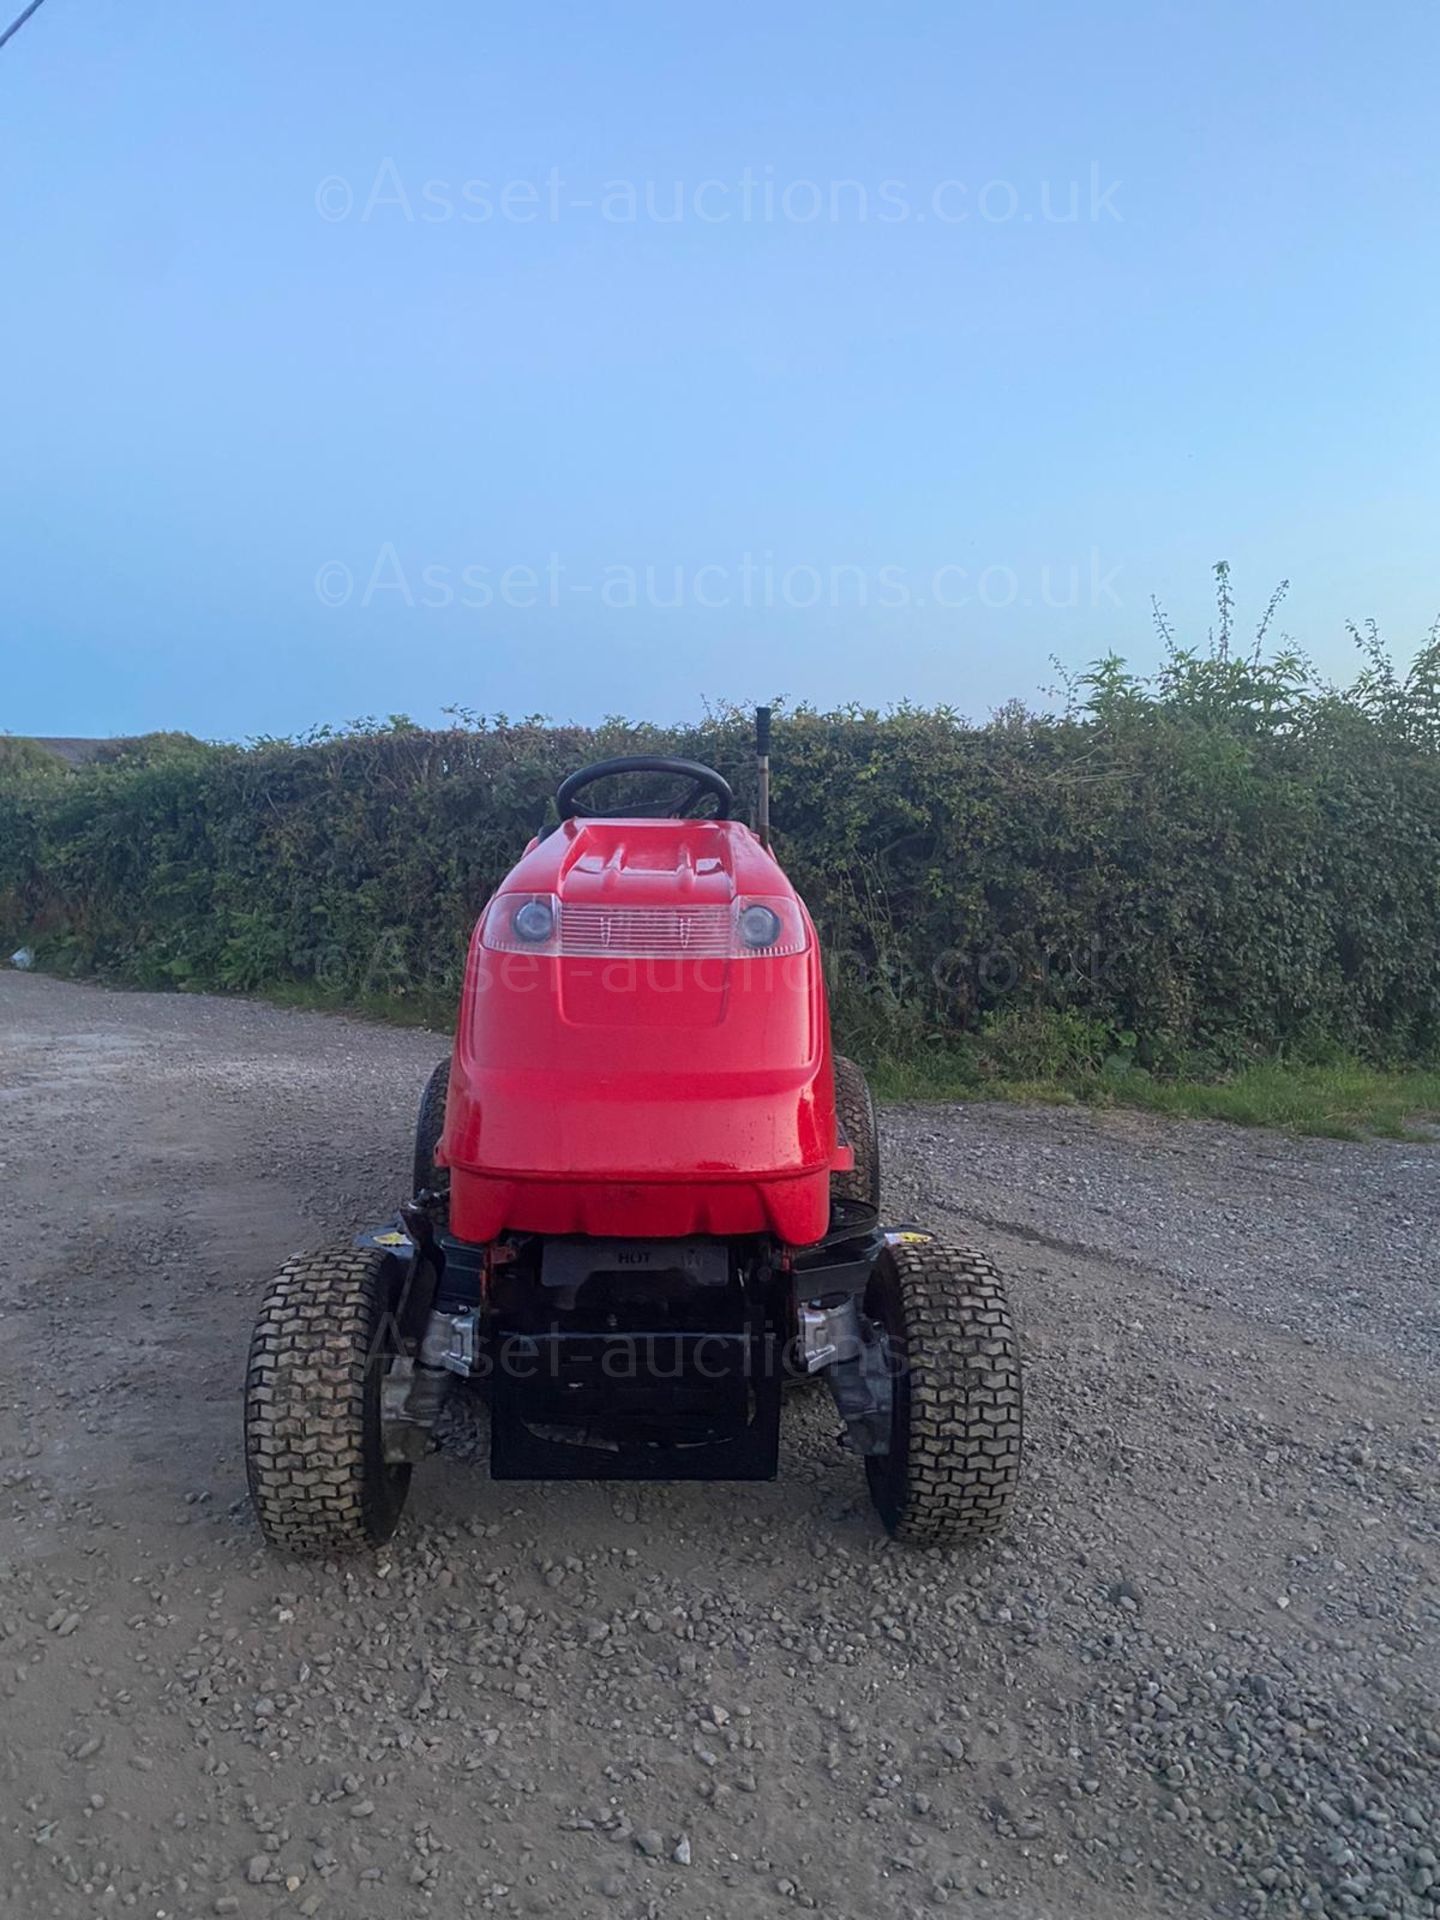 COUNTAX C600H RIDE ON LAWN MOWER, 4 WHEEL DRIVE, CUTS AND COLLECTS *NO VAT* - Image 3 of 7